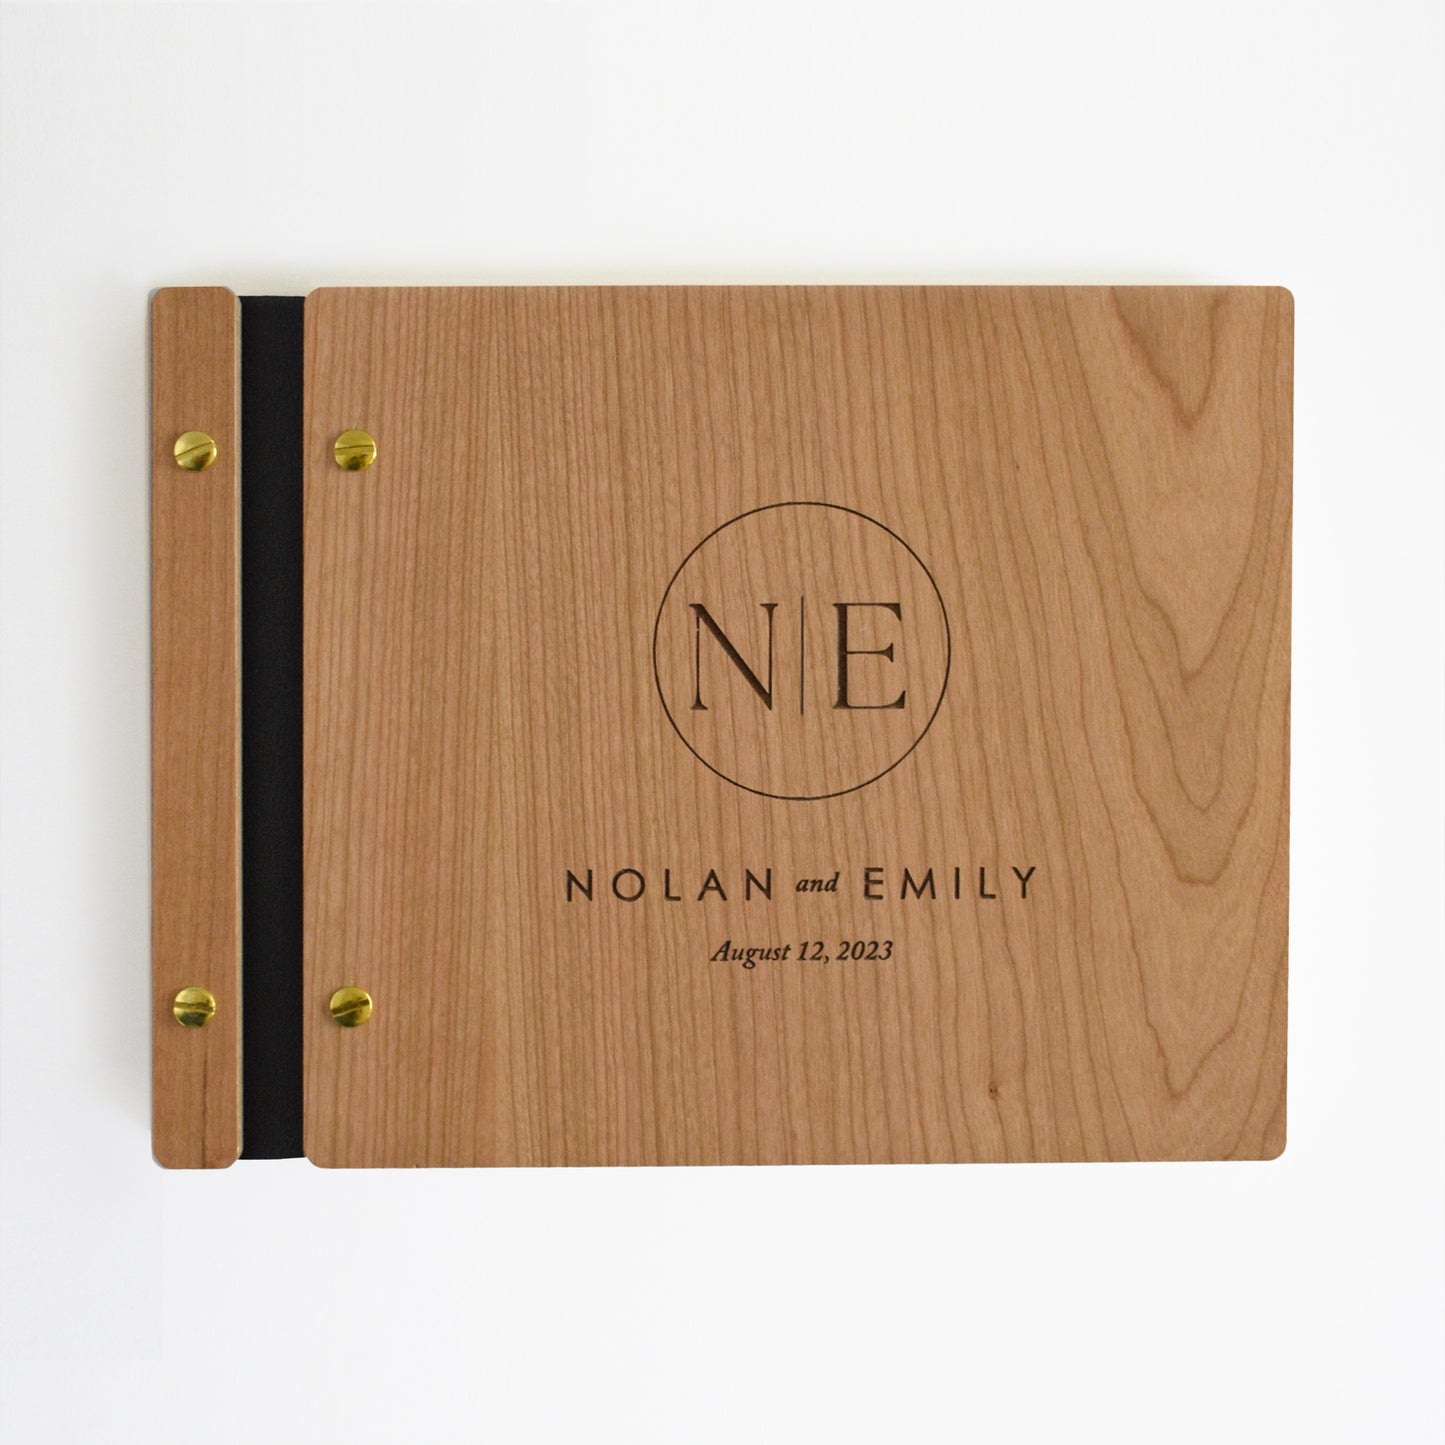 Wedding guest book made out of cherry wood, black vegan leather, gold hardware, and monogram design for the engraving.